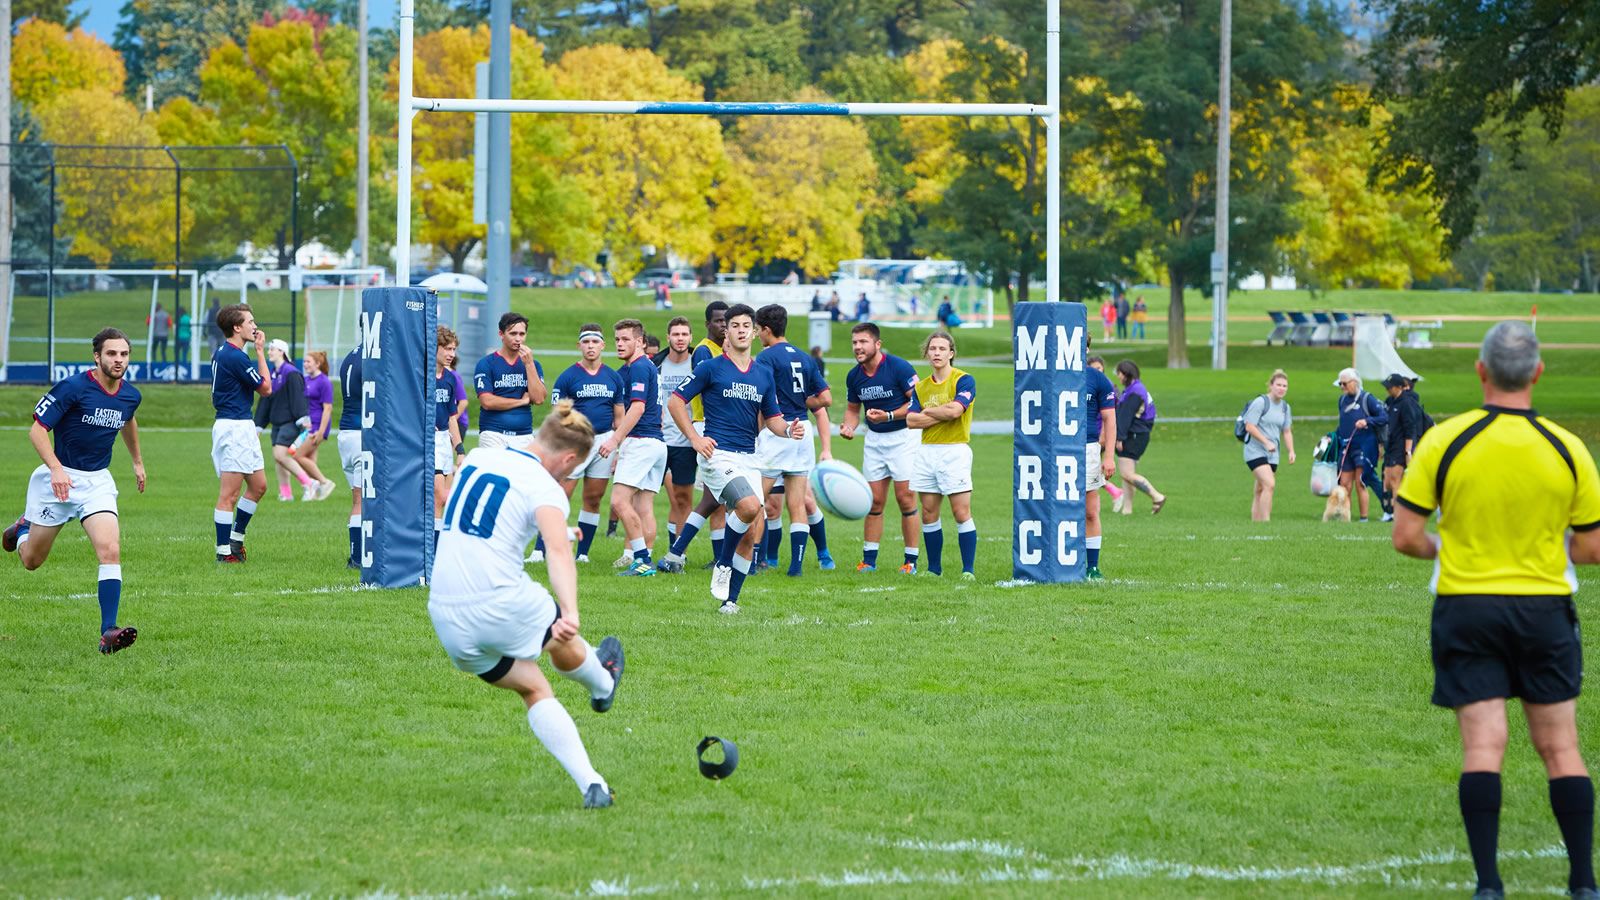 Rugby kick